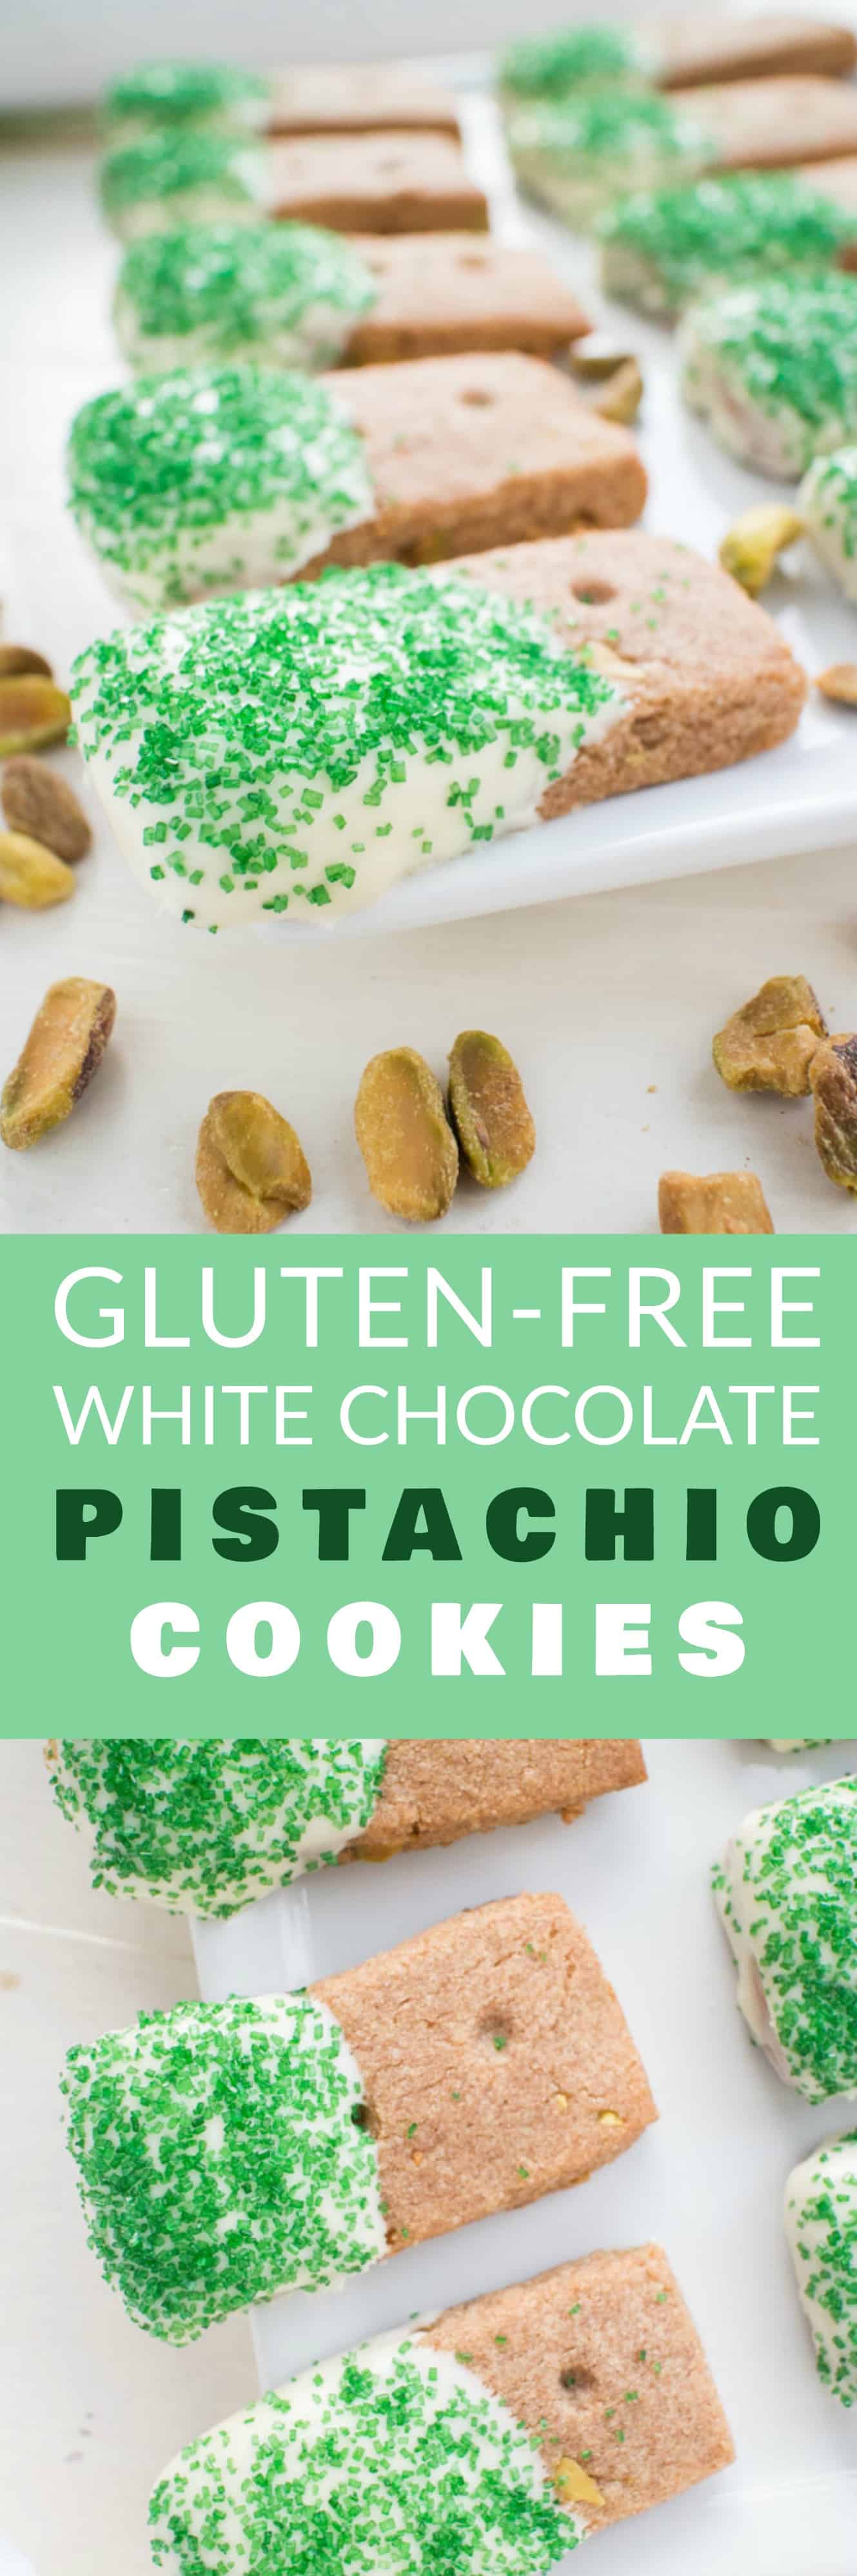 GLUTEN-FREE White Chocolate Dipped Pistachio​ ​​Cookies​ are the BEST for CHRISTMAS baking! This easy gluten-free recipe makes 48 spiced pistachio cookies that are dipped in melted white chocolate! They are made with almond flour and teff flour, making a perfectly formed cookie! They are one of my favorite Christmas cookies, perfect for family eating and holiday gifts!